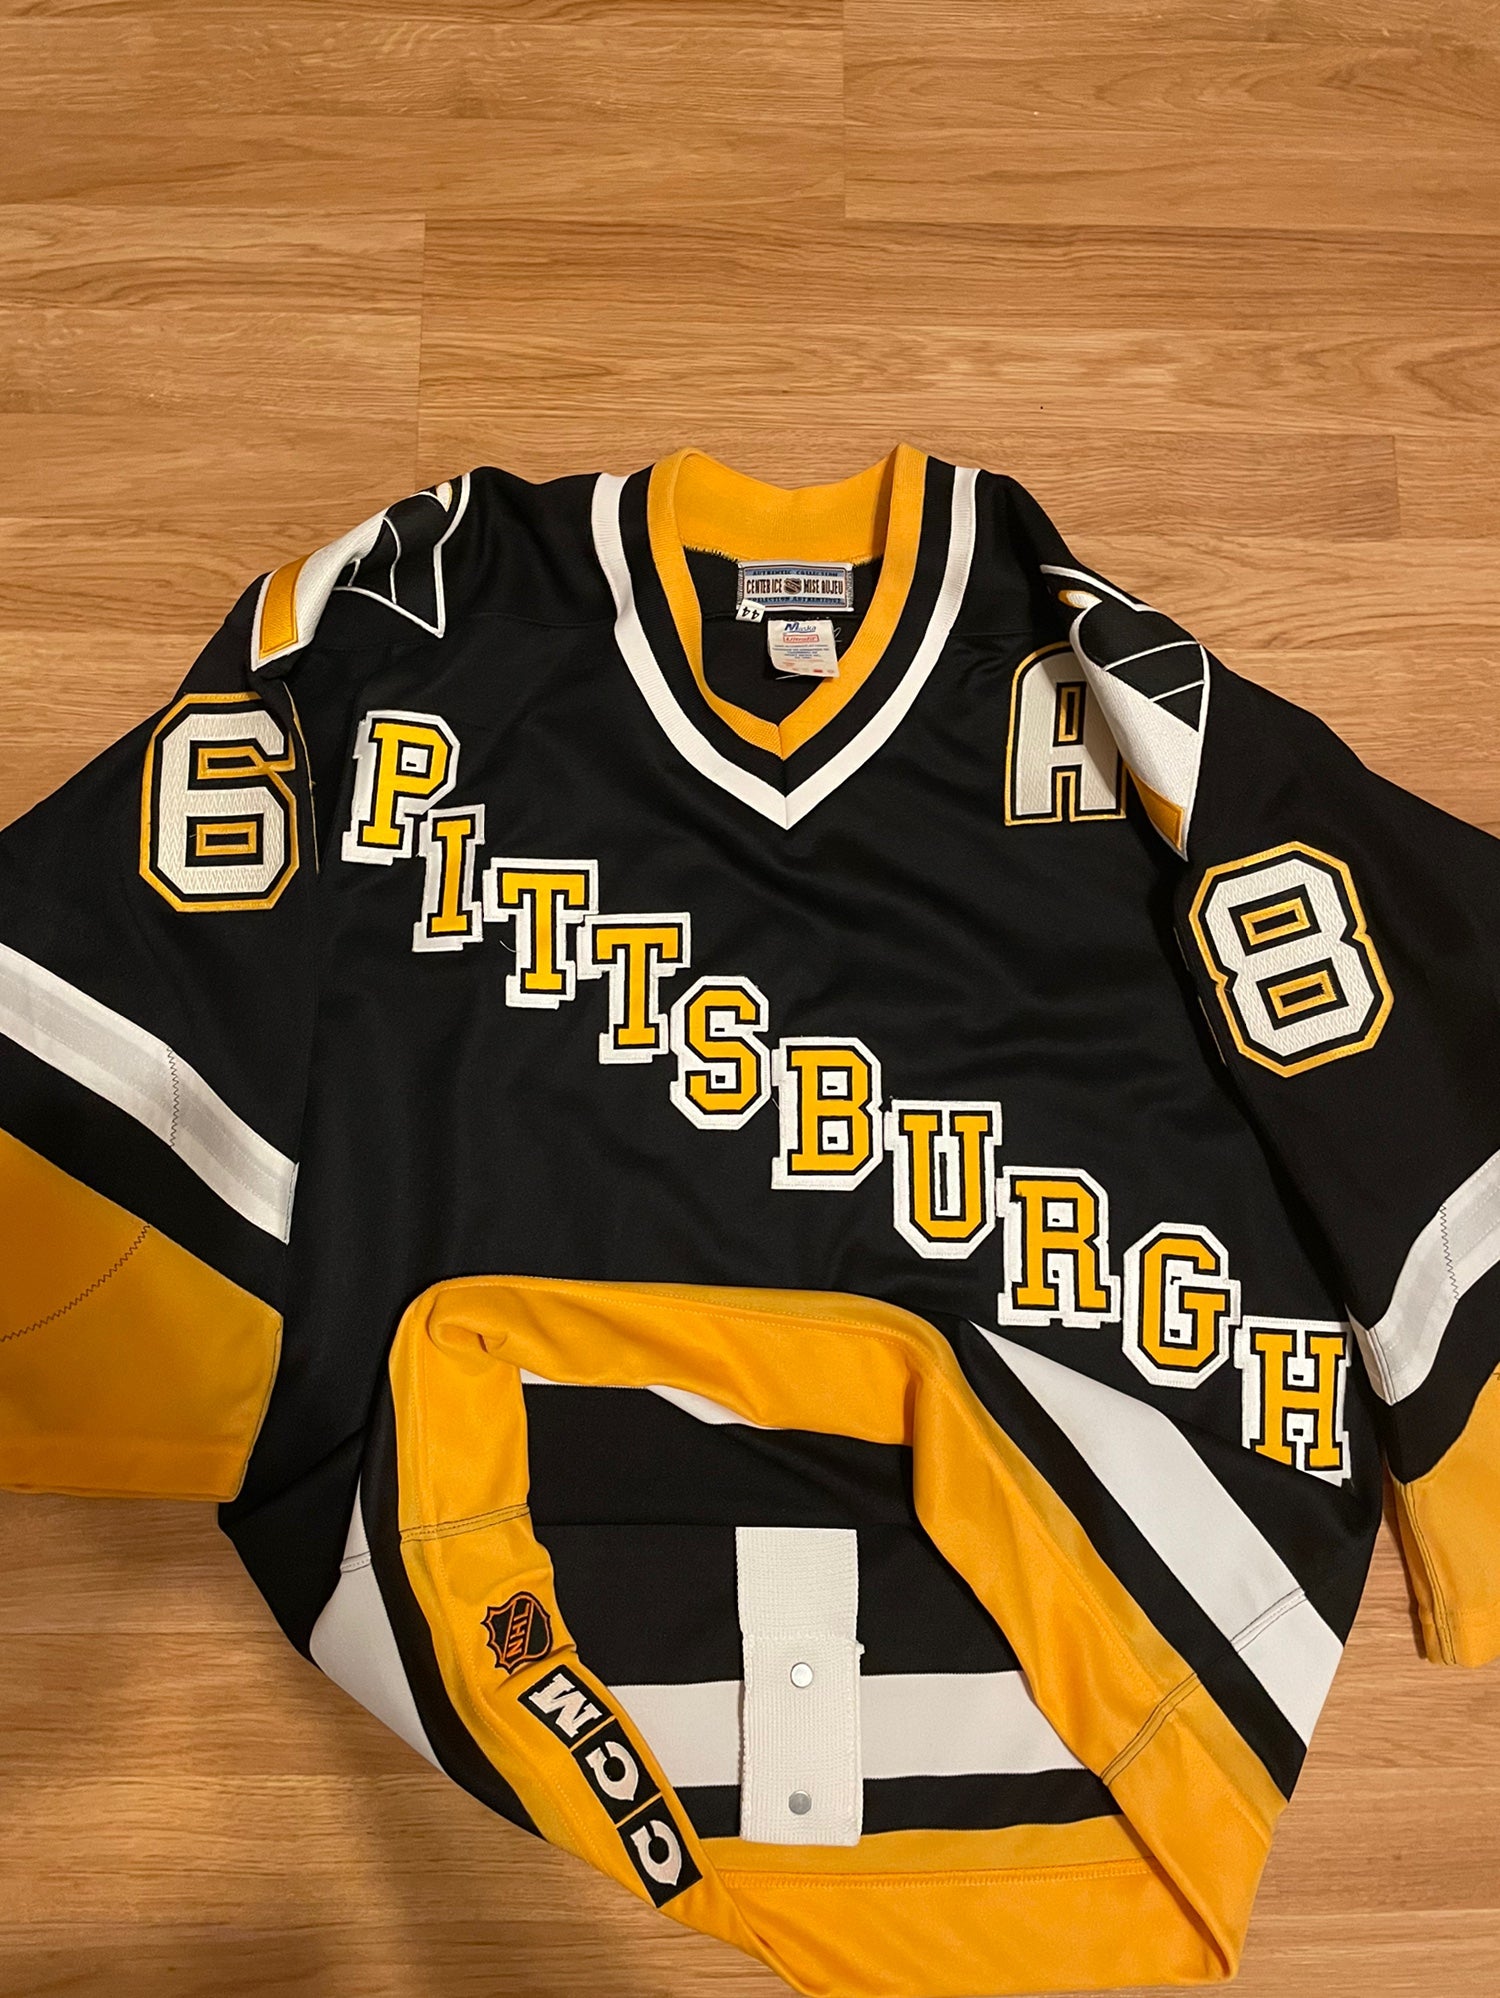 Pittsburgh Penguins Vintage 80s CCM Hockey Jersey Made in 